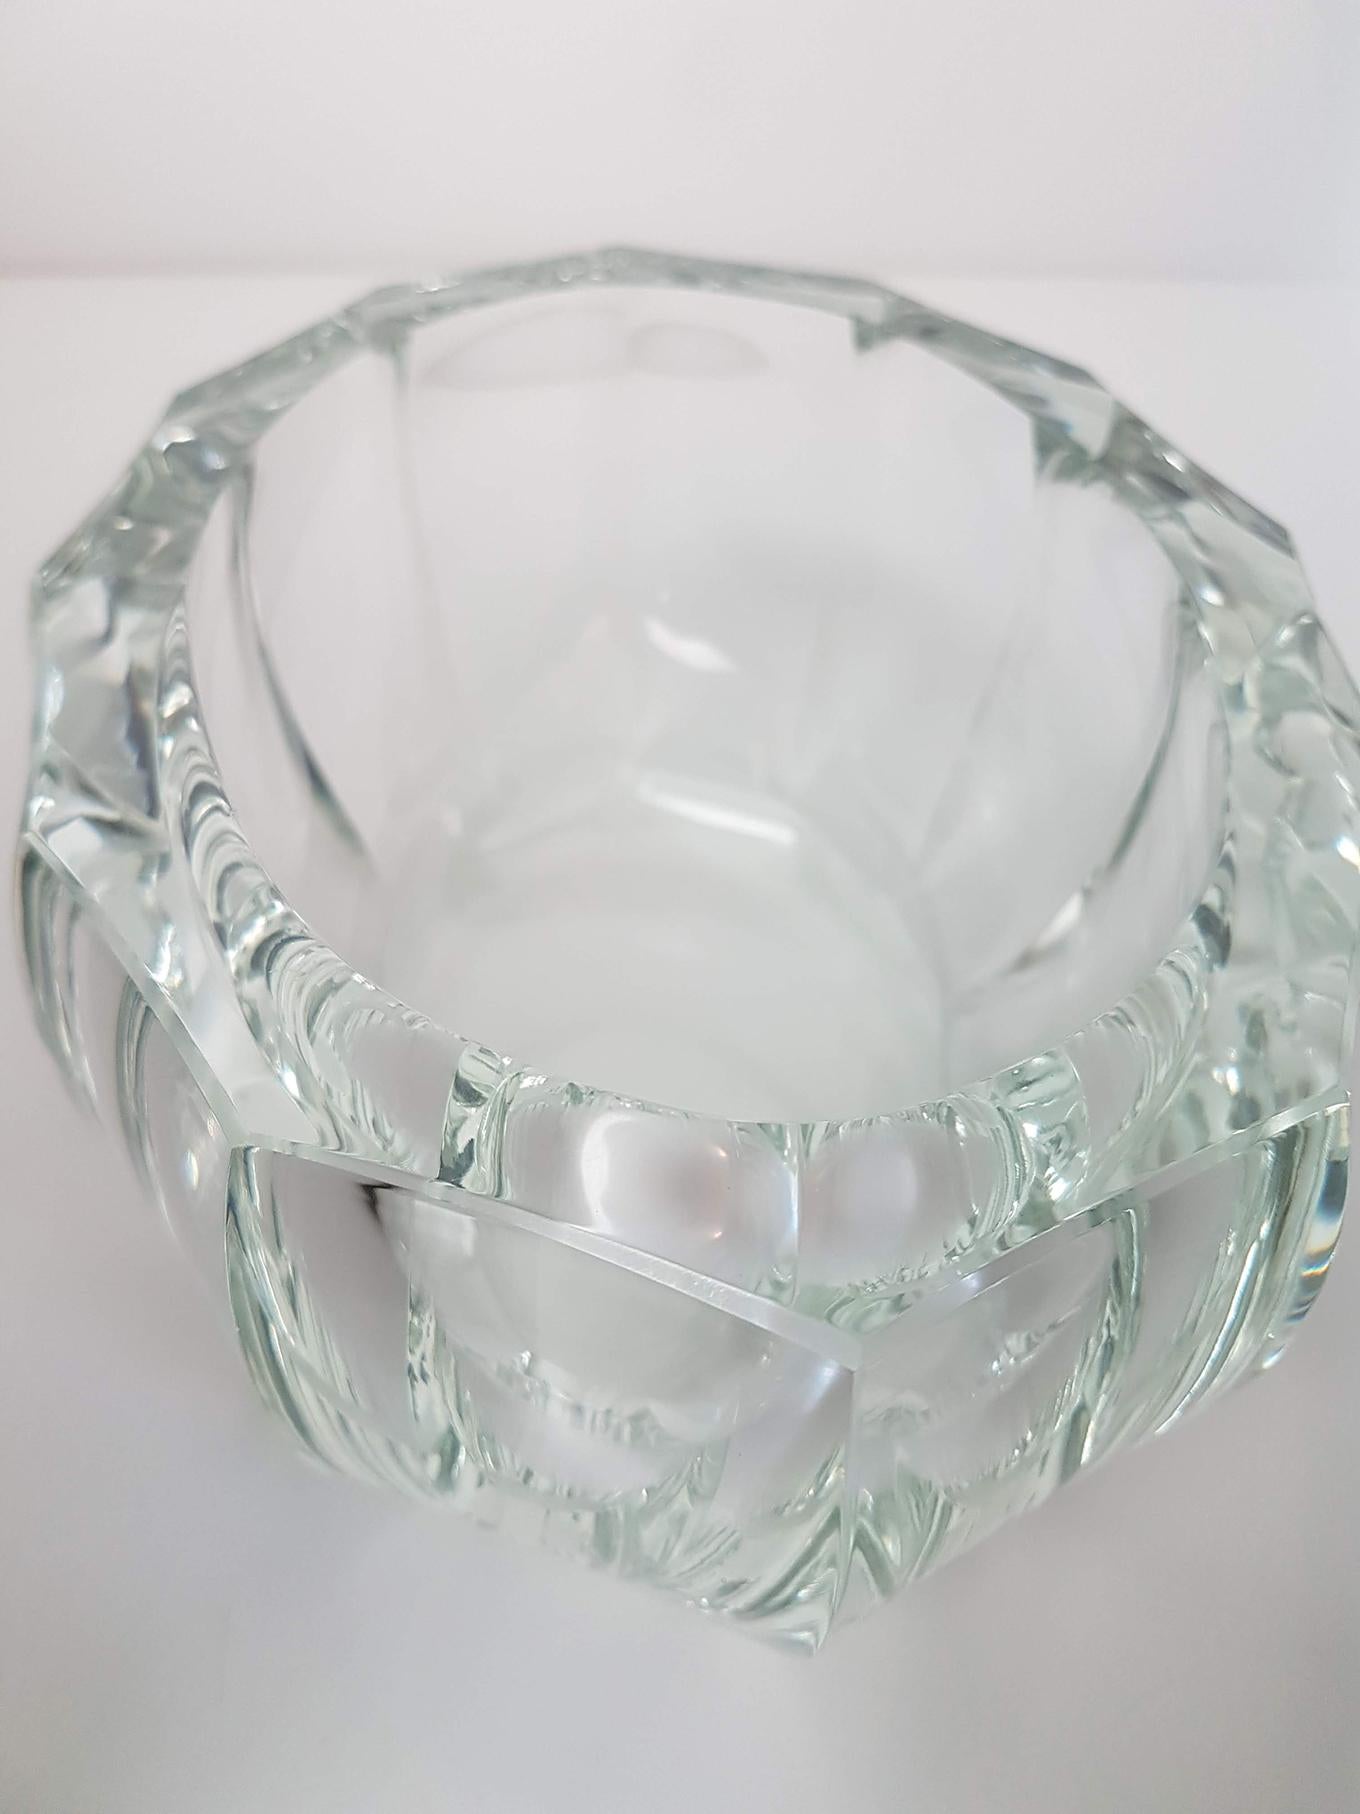 Moser Crystal Purity Clear Glass Set 'Bowl and Vase', Early 20th Century For Sale 1